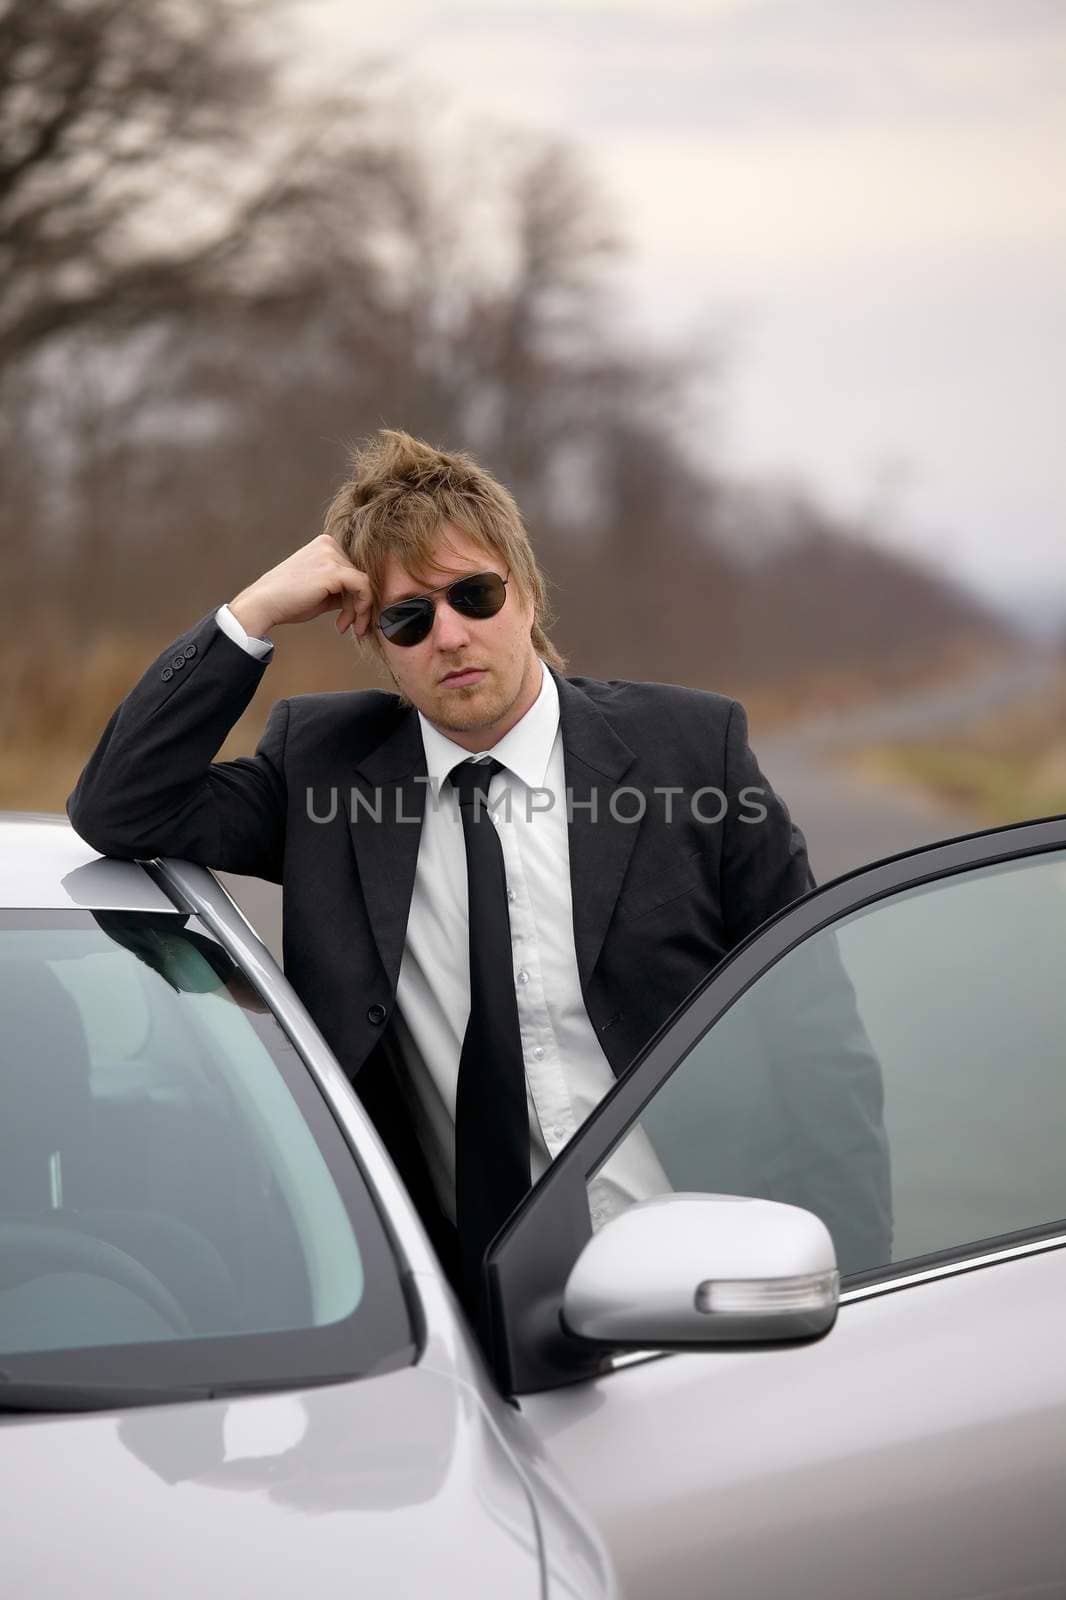 Driver of a car standing and waiting